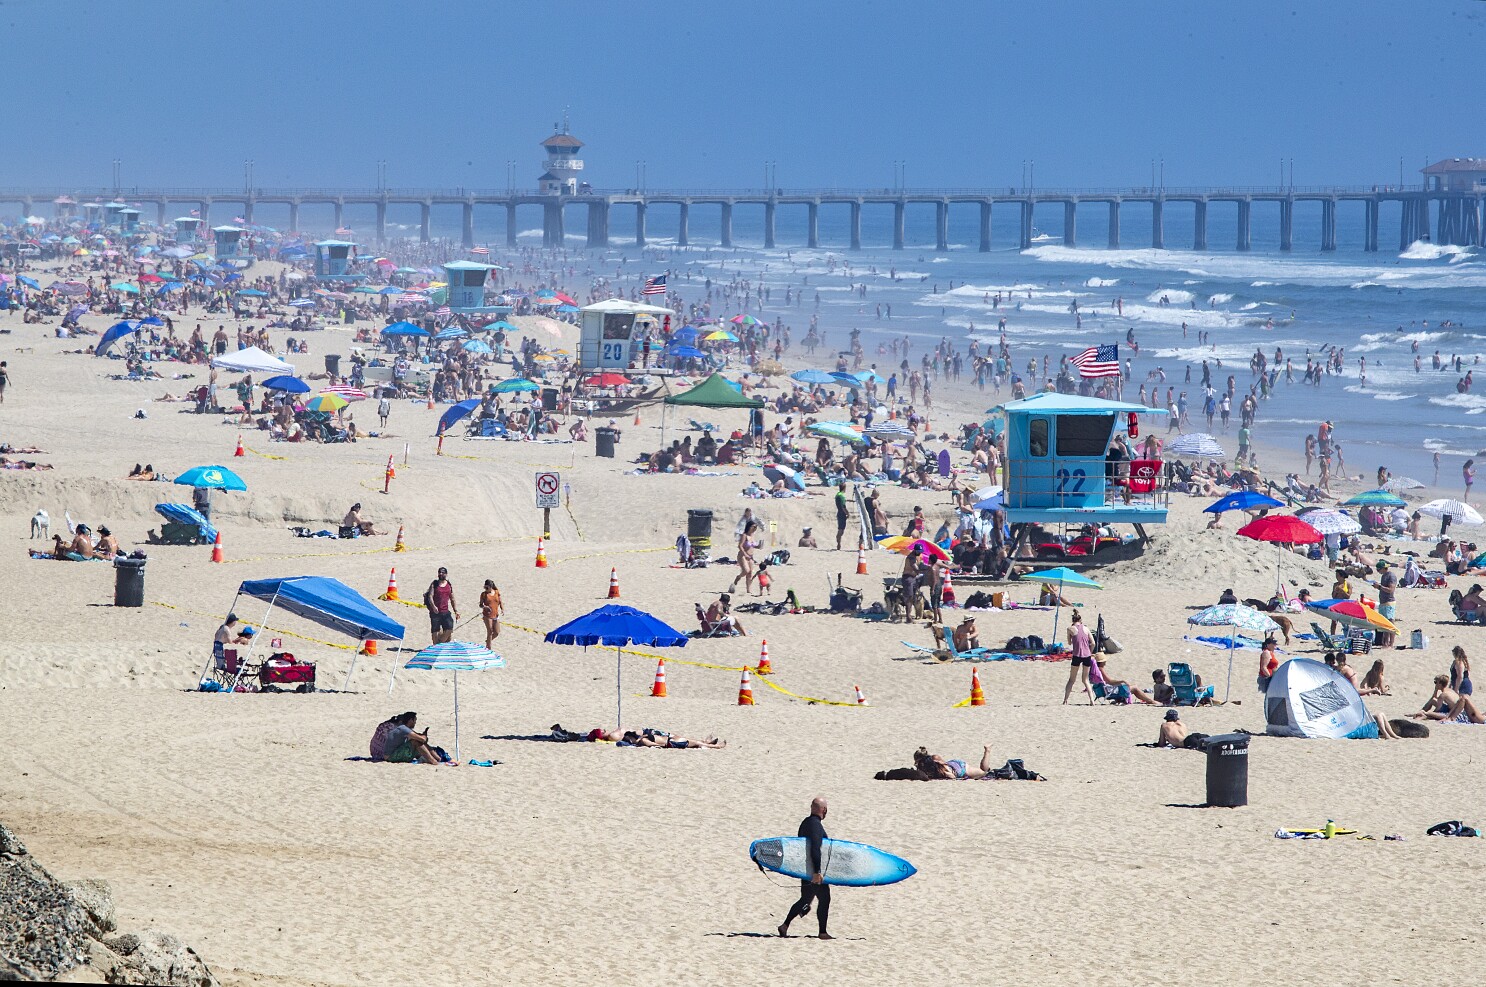 Amid heat wave, Californians flock to the beaches - Los Angeles Times